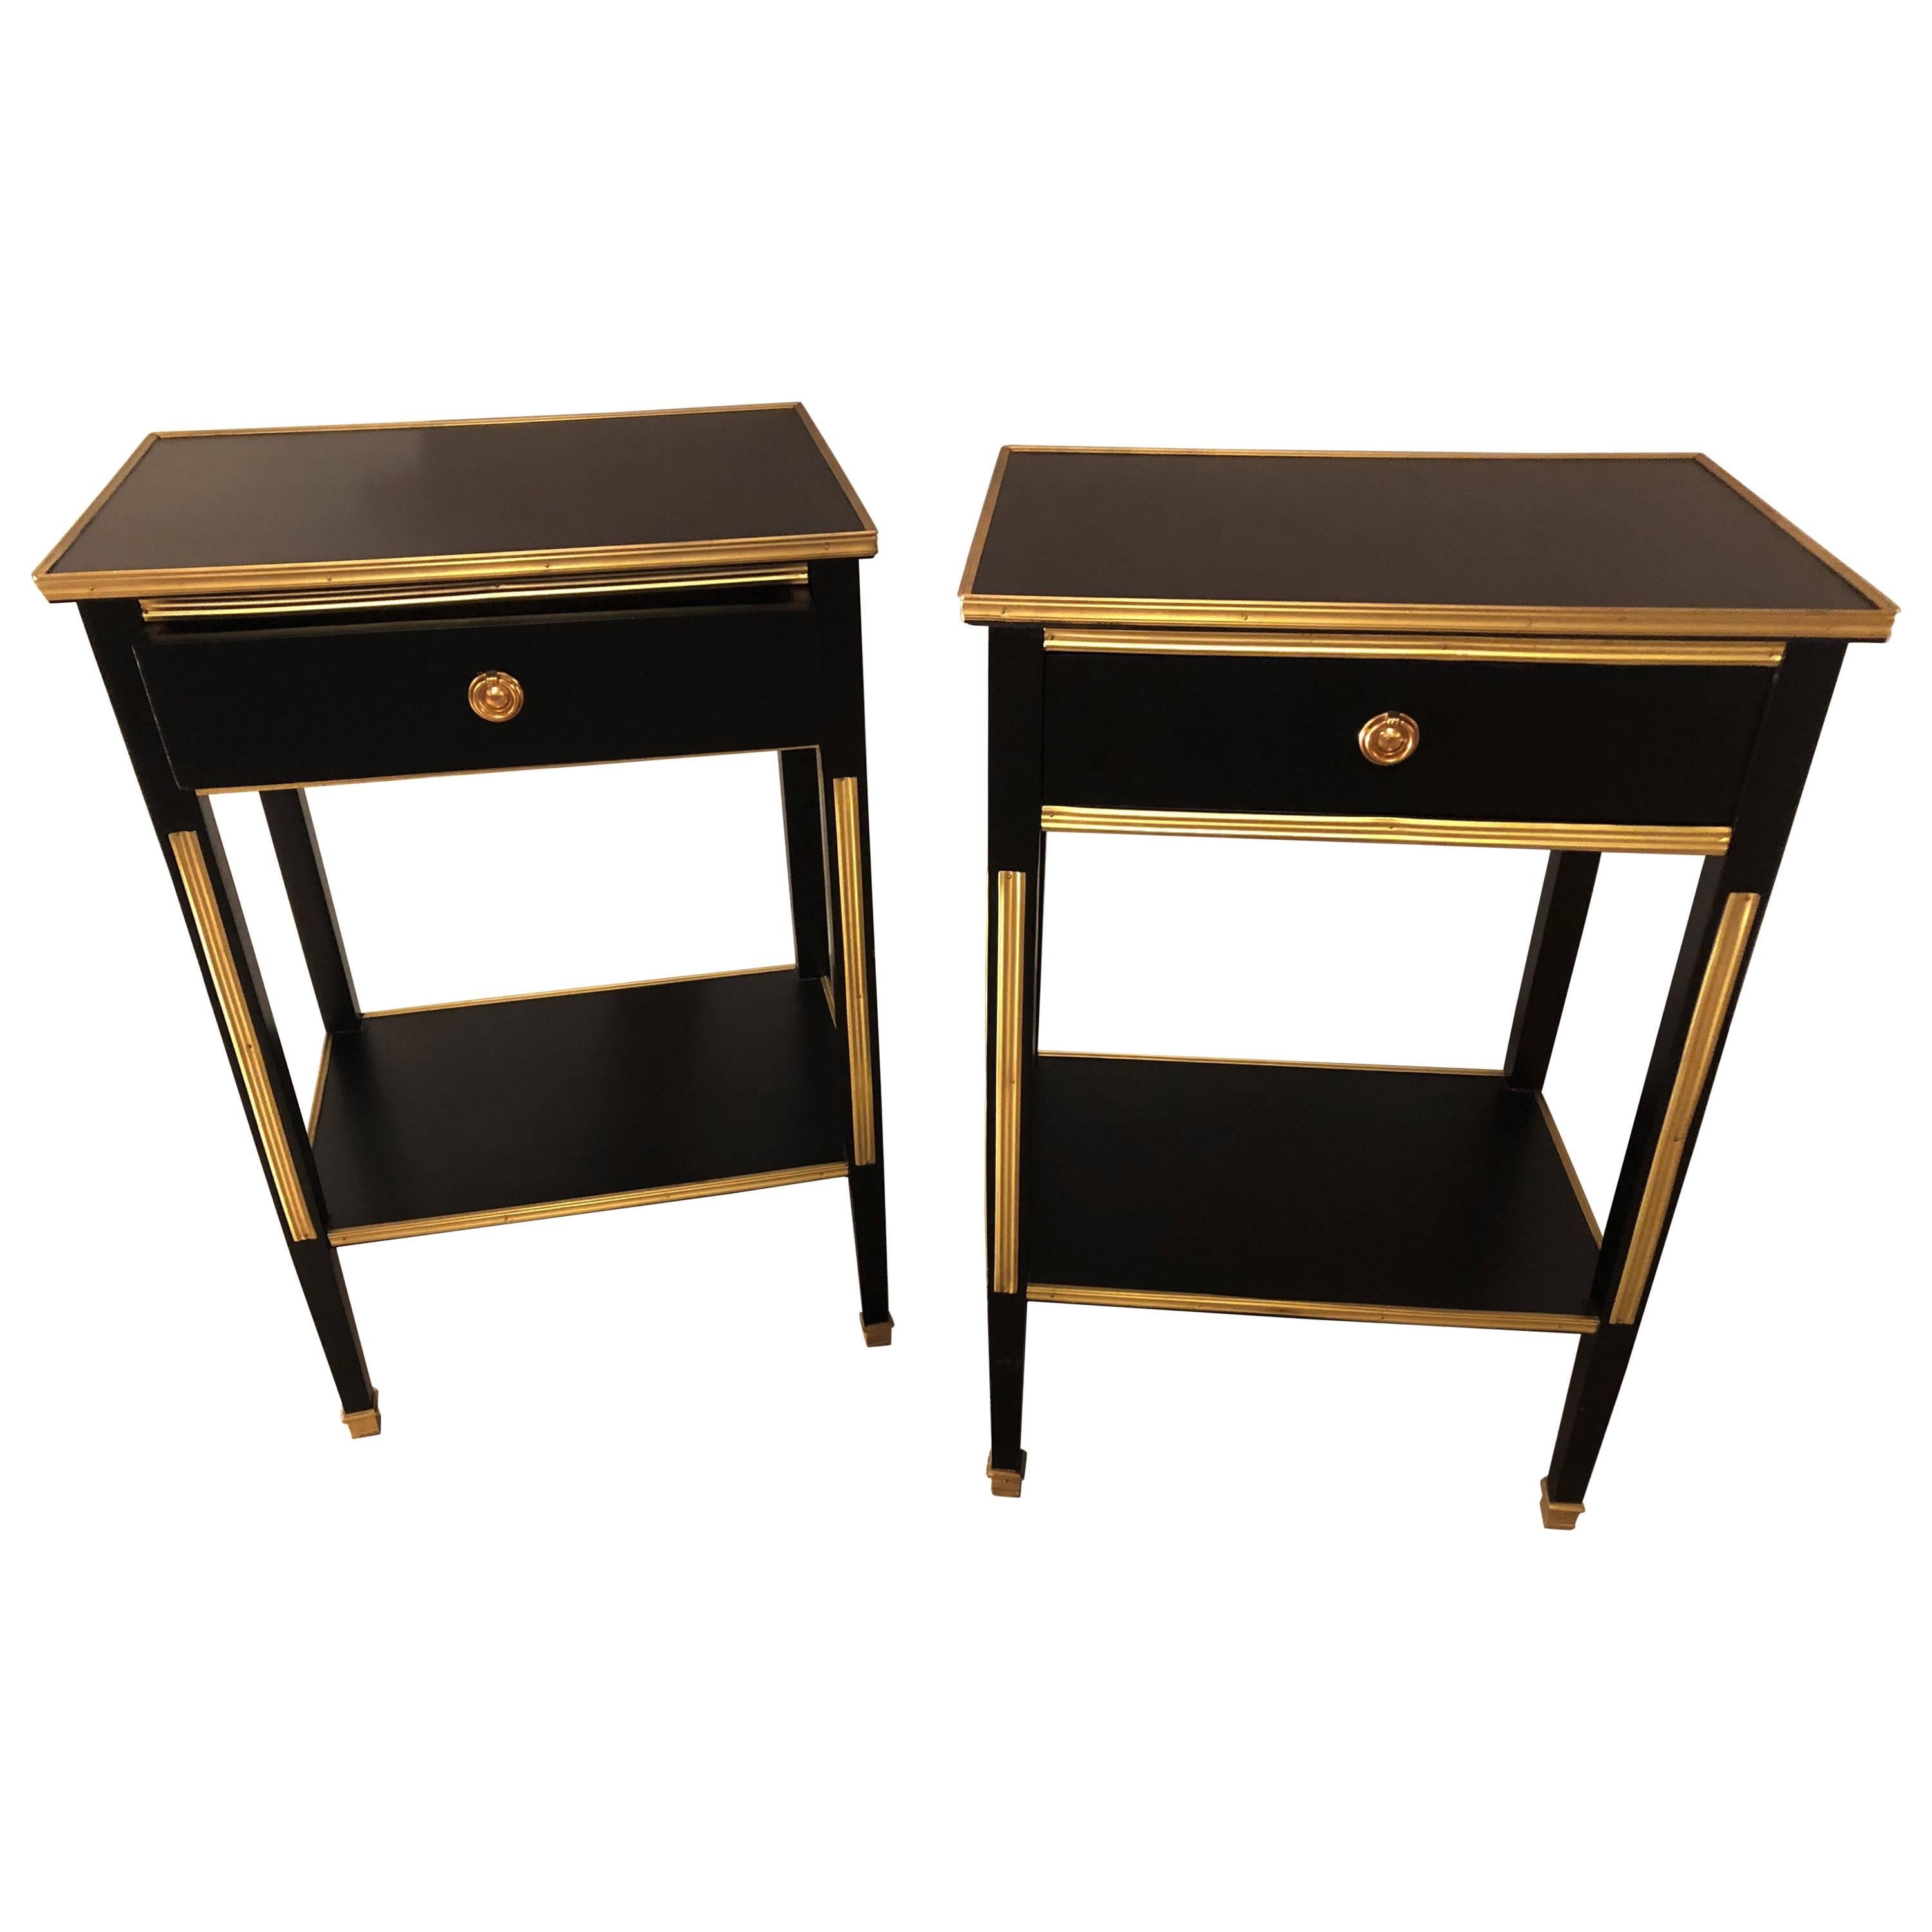 Pair Russian Neoclassical Style Ebony Finish One Drawer Stands or End Tables